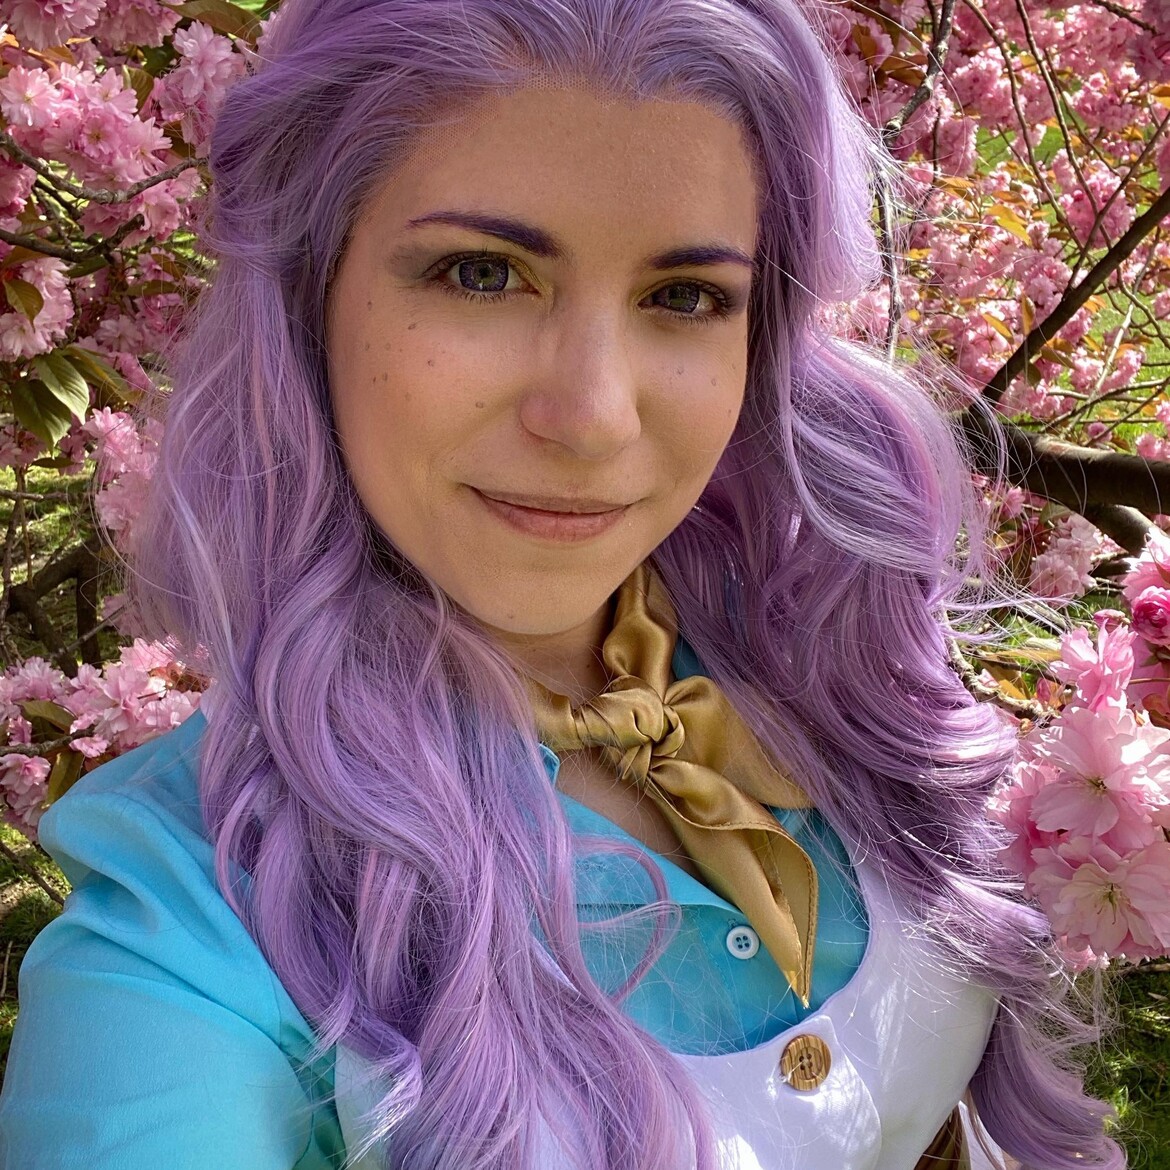 Selfie of a cosplayer dressed as Imogen Temult from Critical Role. She has a long, curly lavender wig, blue shirt, and white vest, and is surrounded by bright pink blooms in the tree behind her.